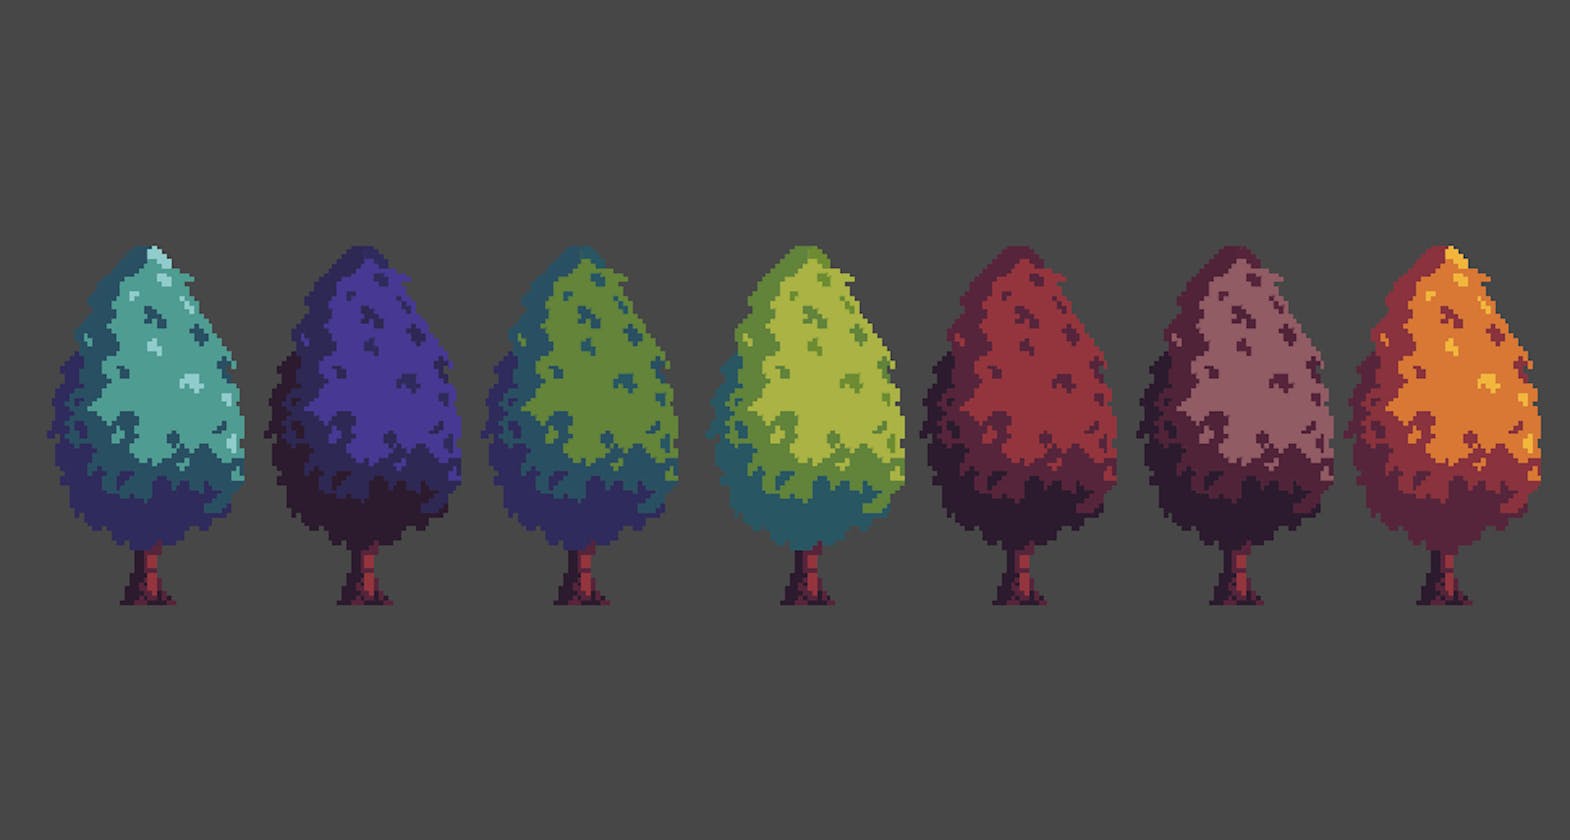 Creating a lot of variations of your Pixelart quickly